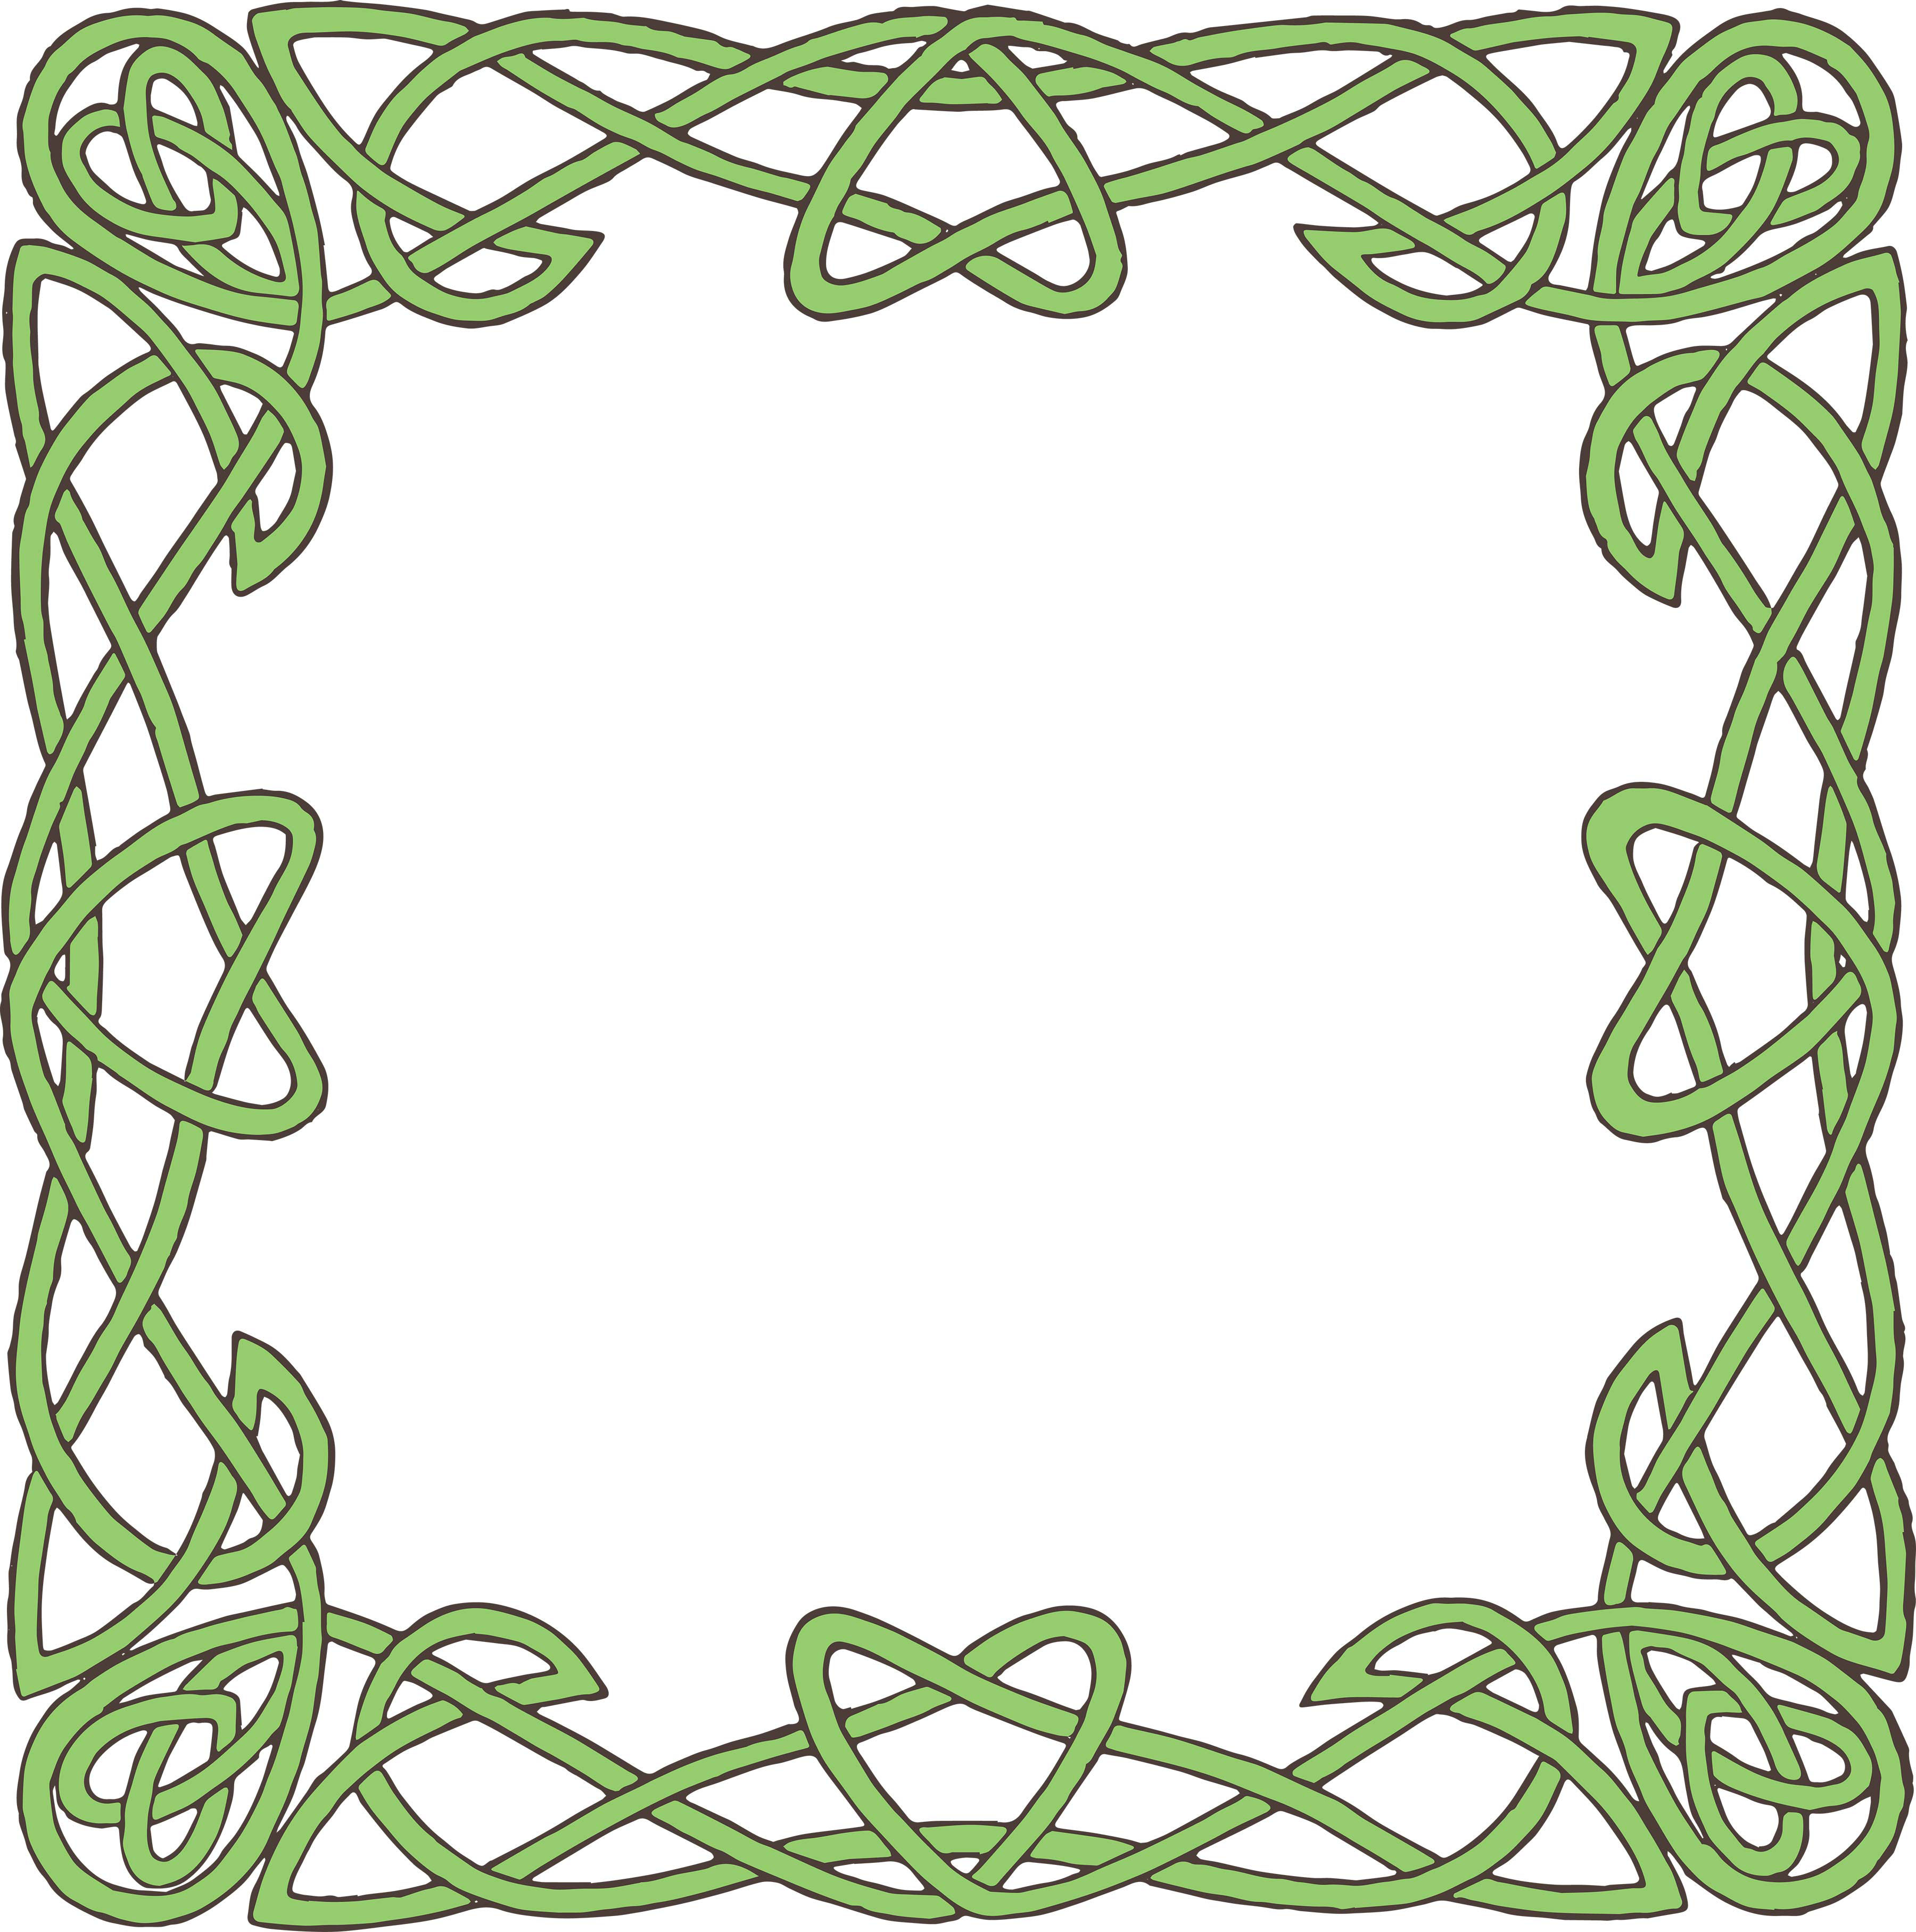 Royalty Free Images - Celtic Knotwork | Oh So Nifty Vintage Graphics